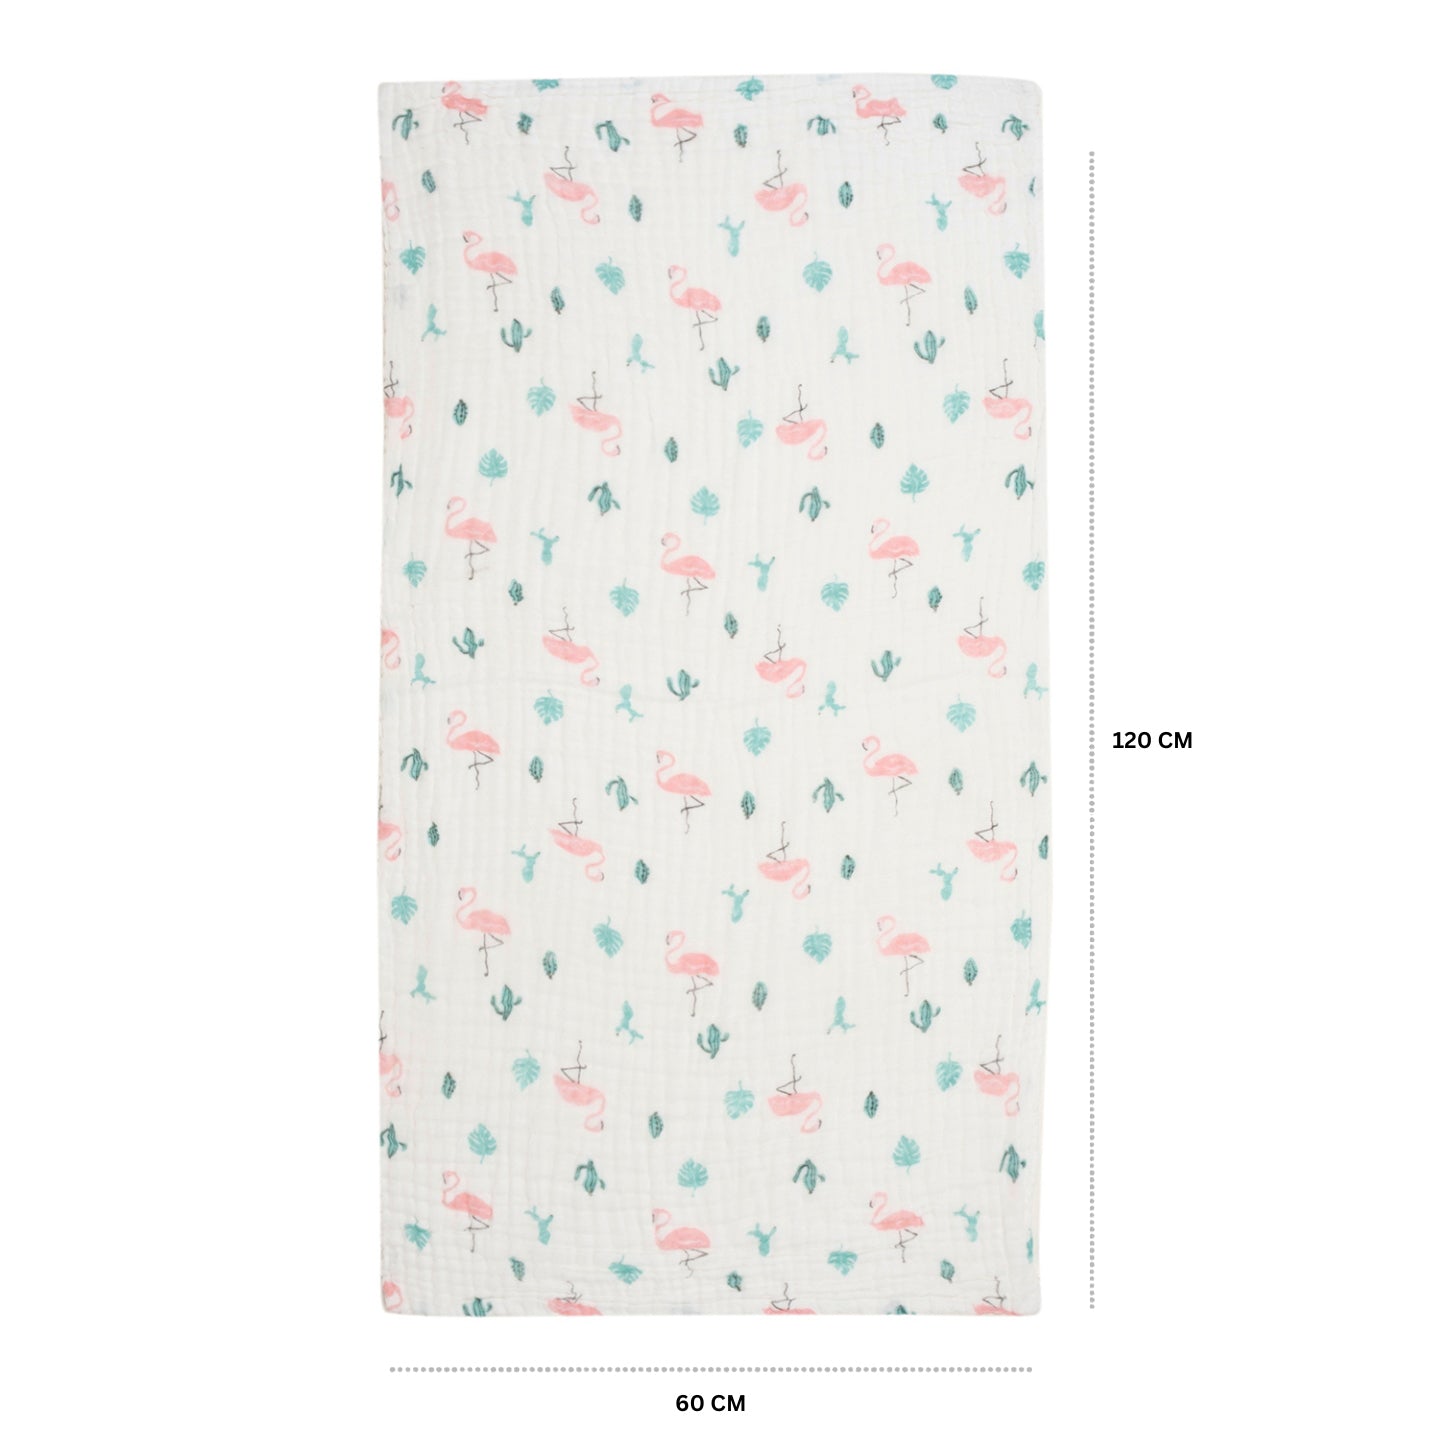 Baby Moo Flamingo 100% Cotton Ultra Soft Eco Friendly Absorbent Towel - White